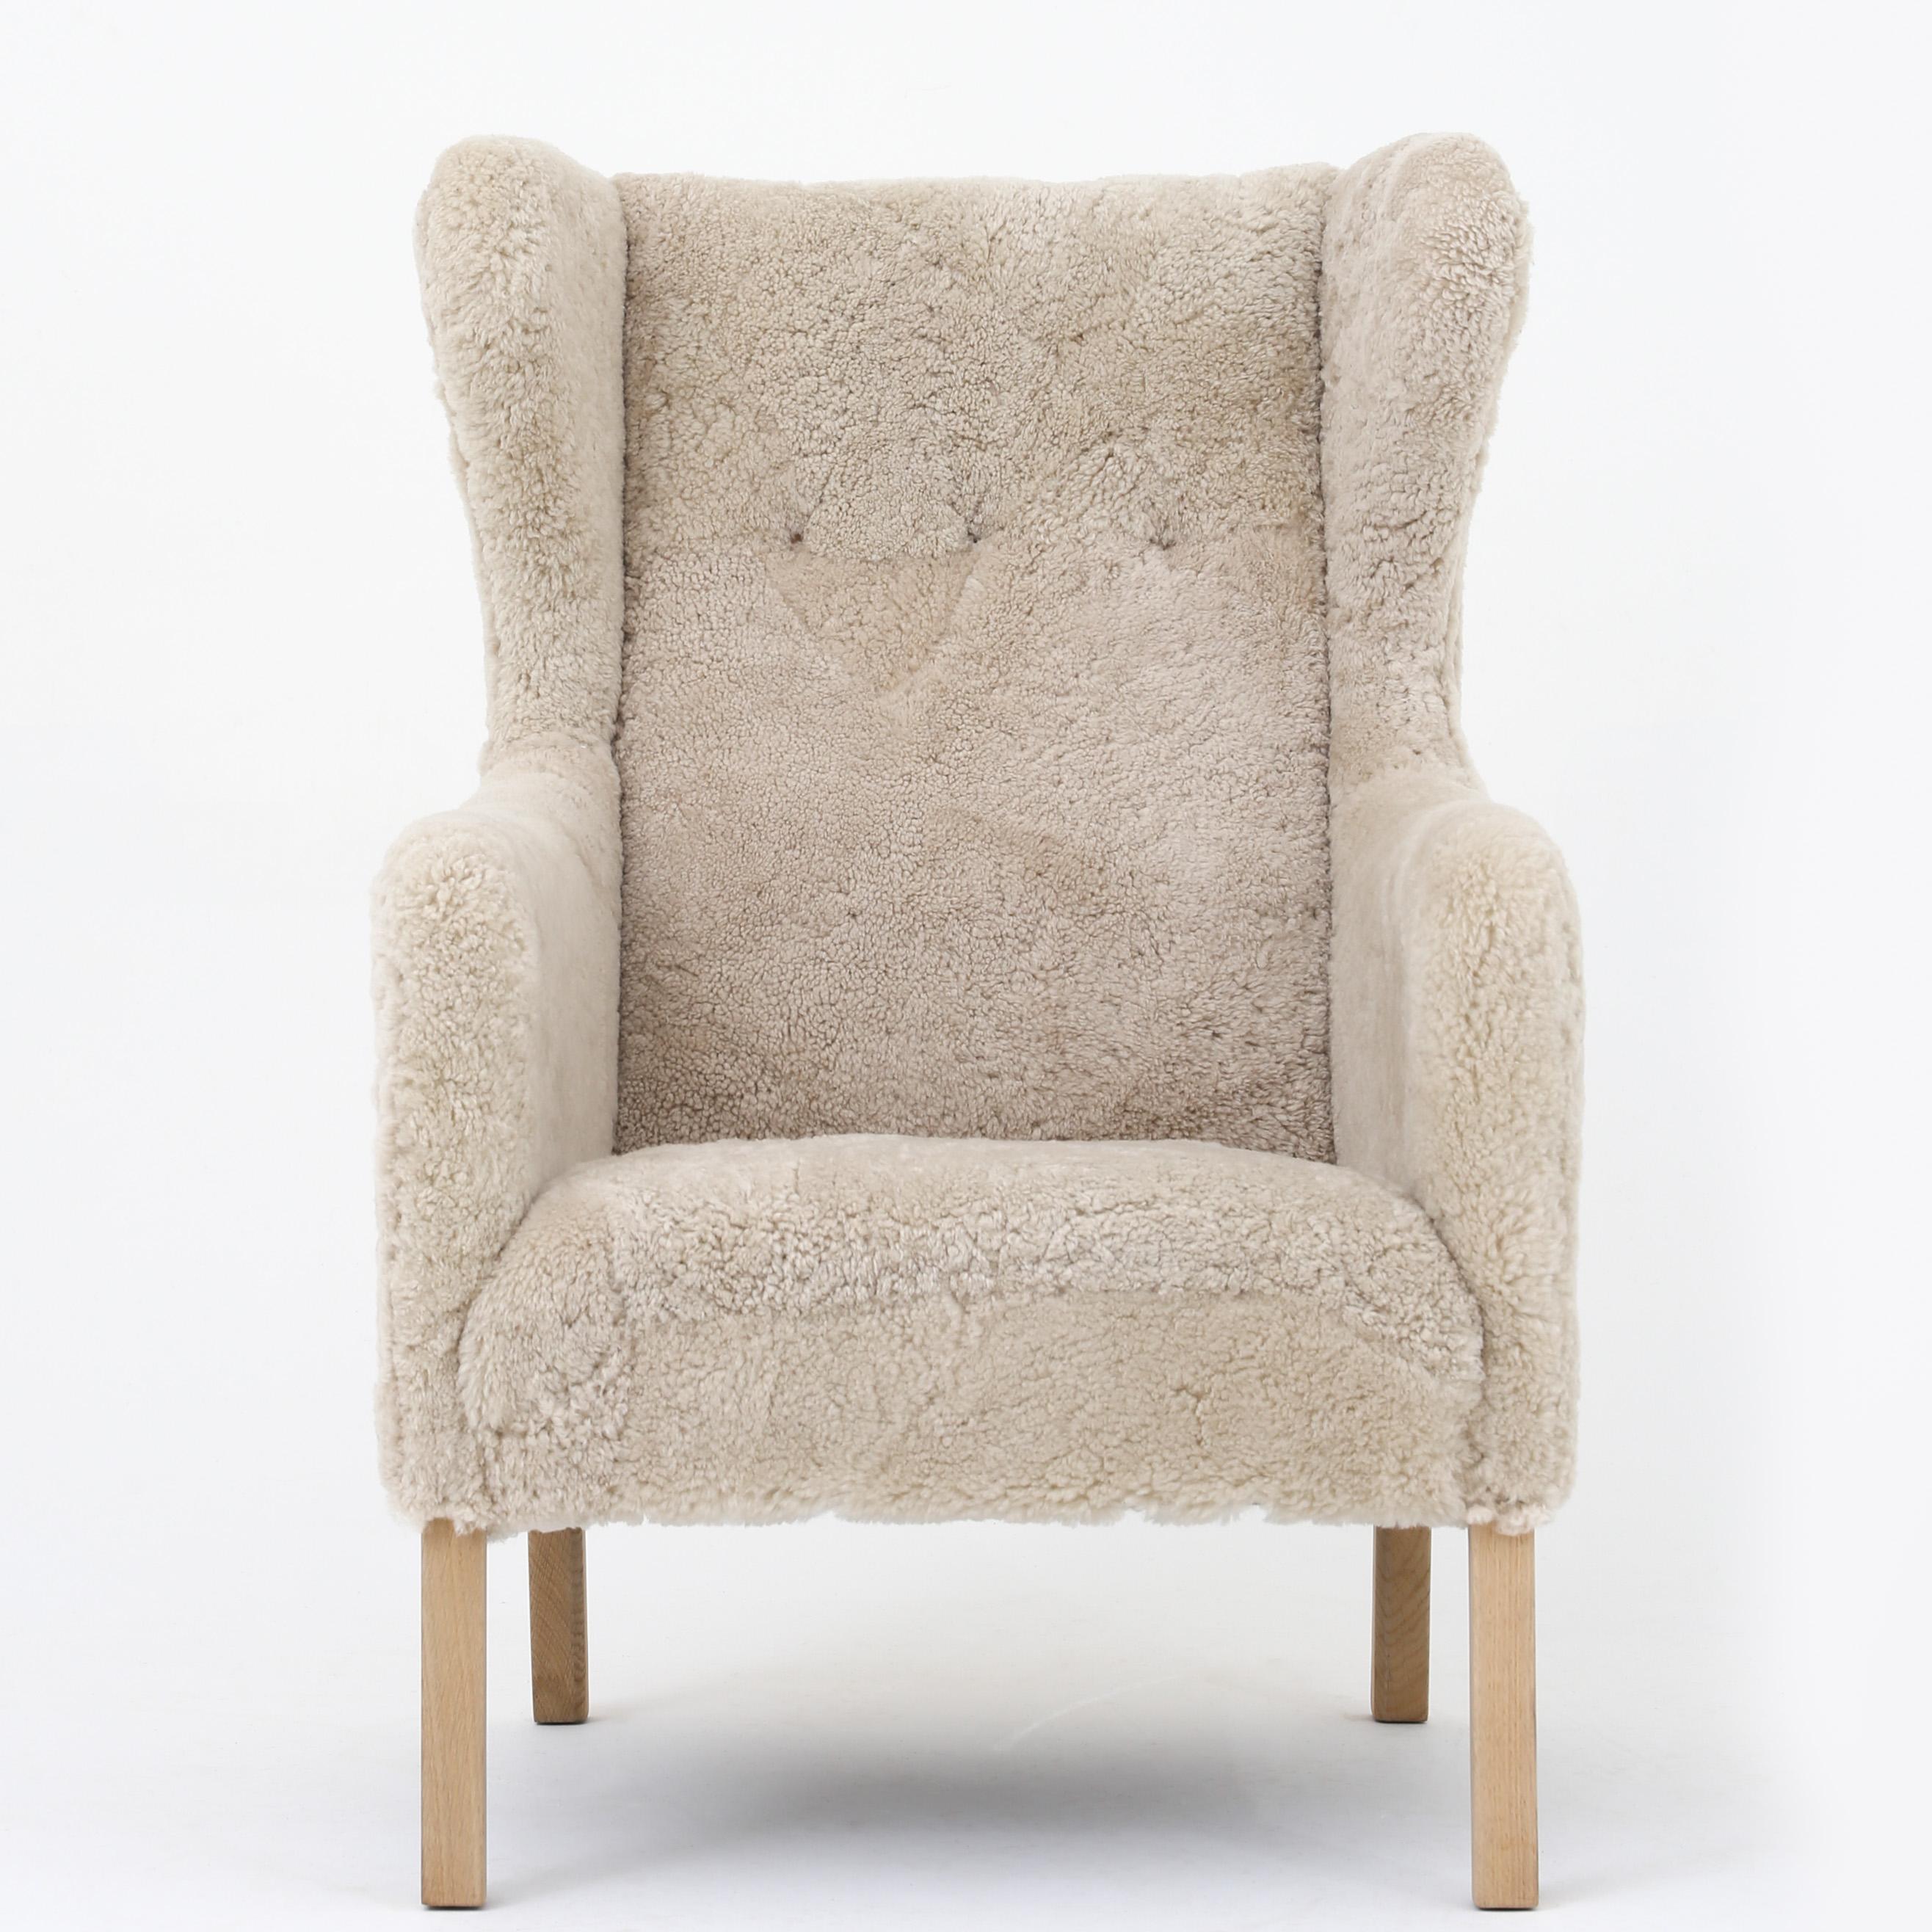 Ejnar Larsen 'Slotsholm' Wing-back chair in new lambswool with beech legs. The chair was originally designed for Christiansborg in Copenhagen.